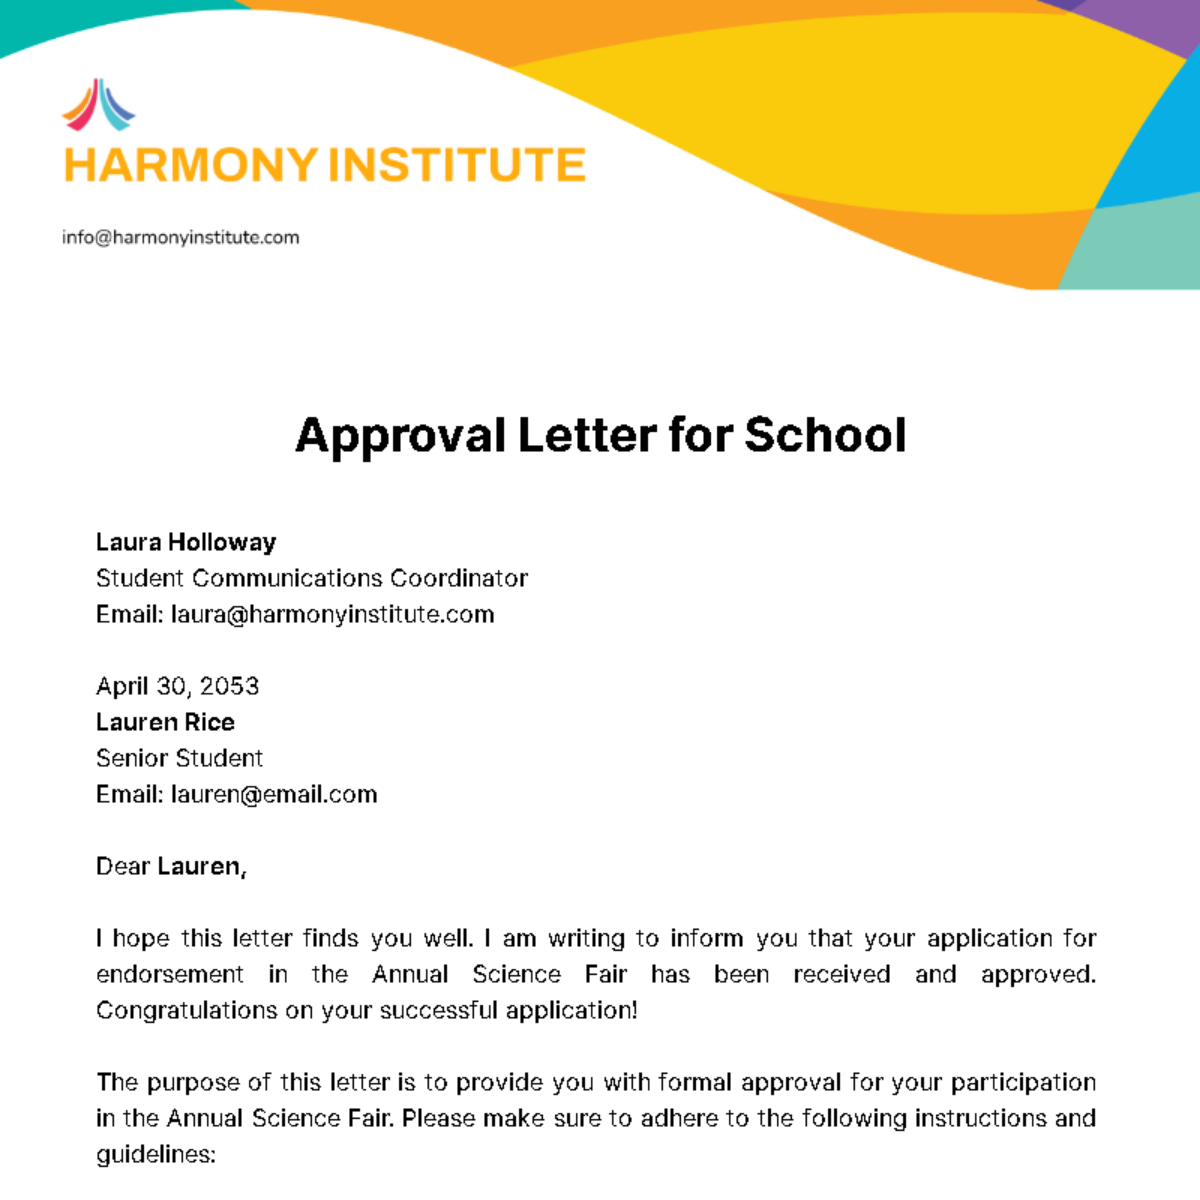 Approval Letter for School  Template